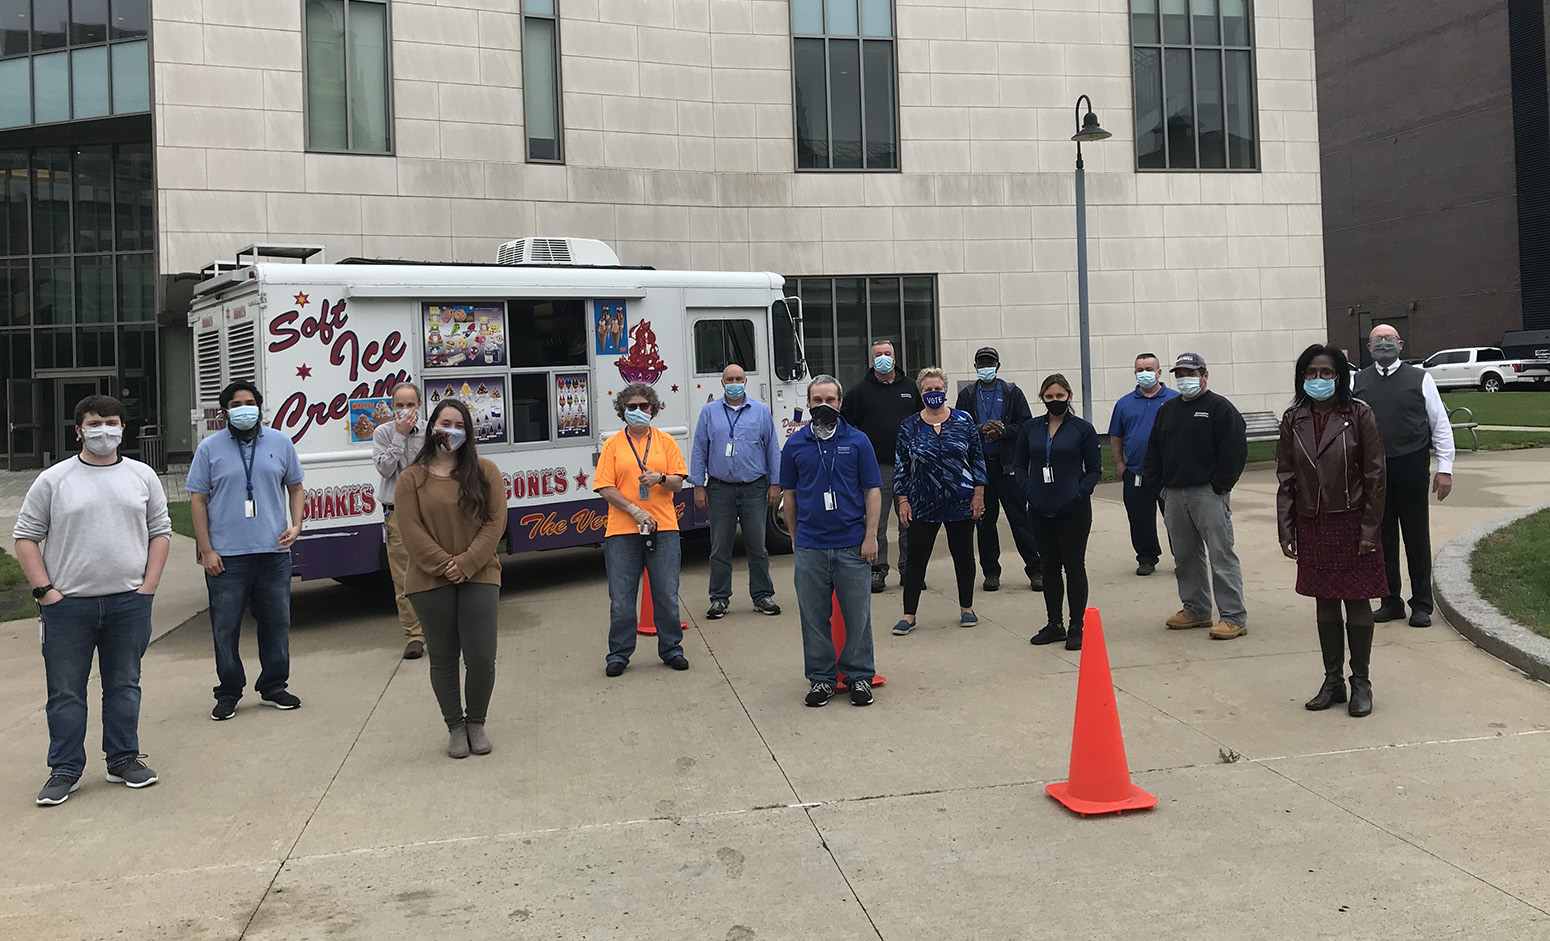 Employees standing in front of ice cream truck